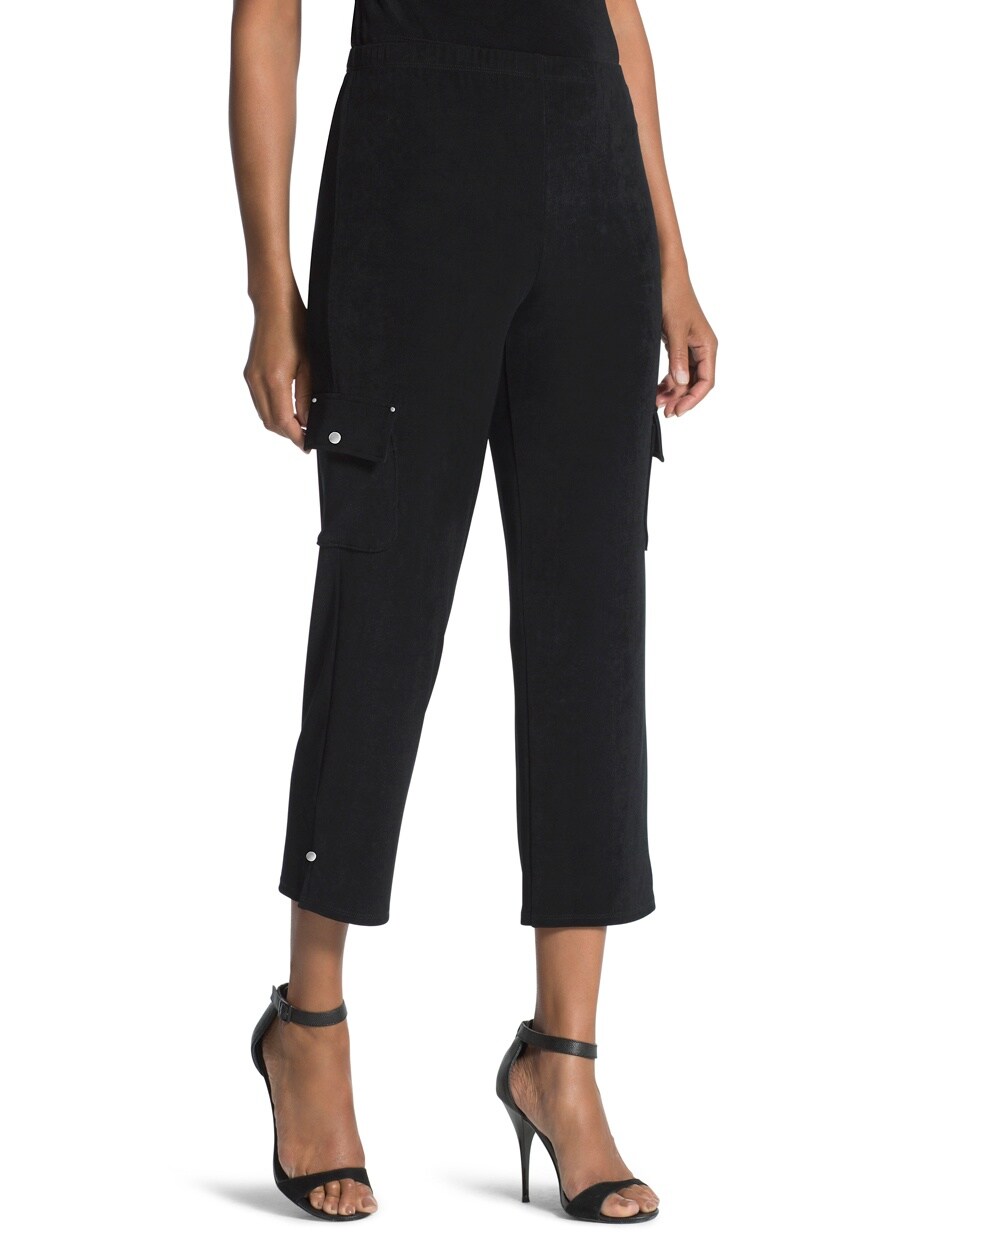 Shop Women's Tall Travelers Pants - Chico's